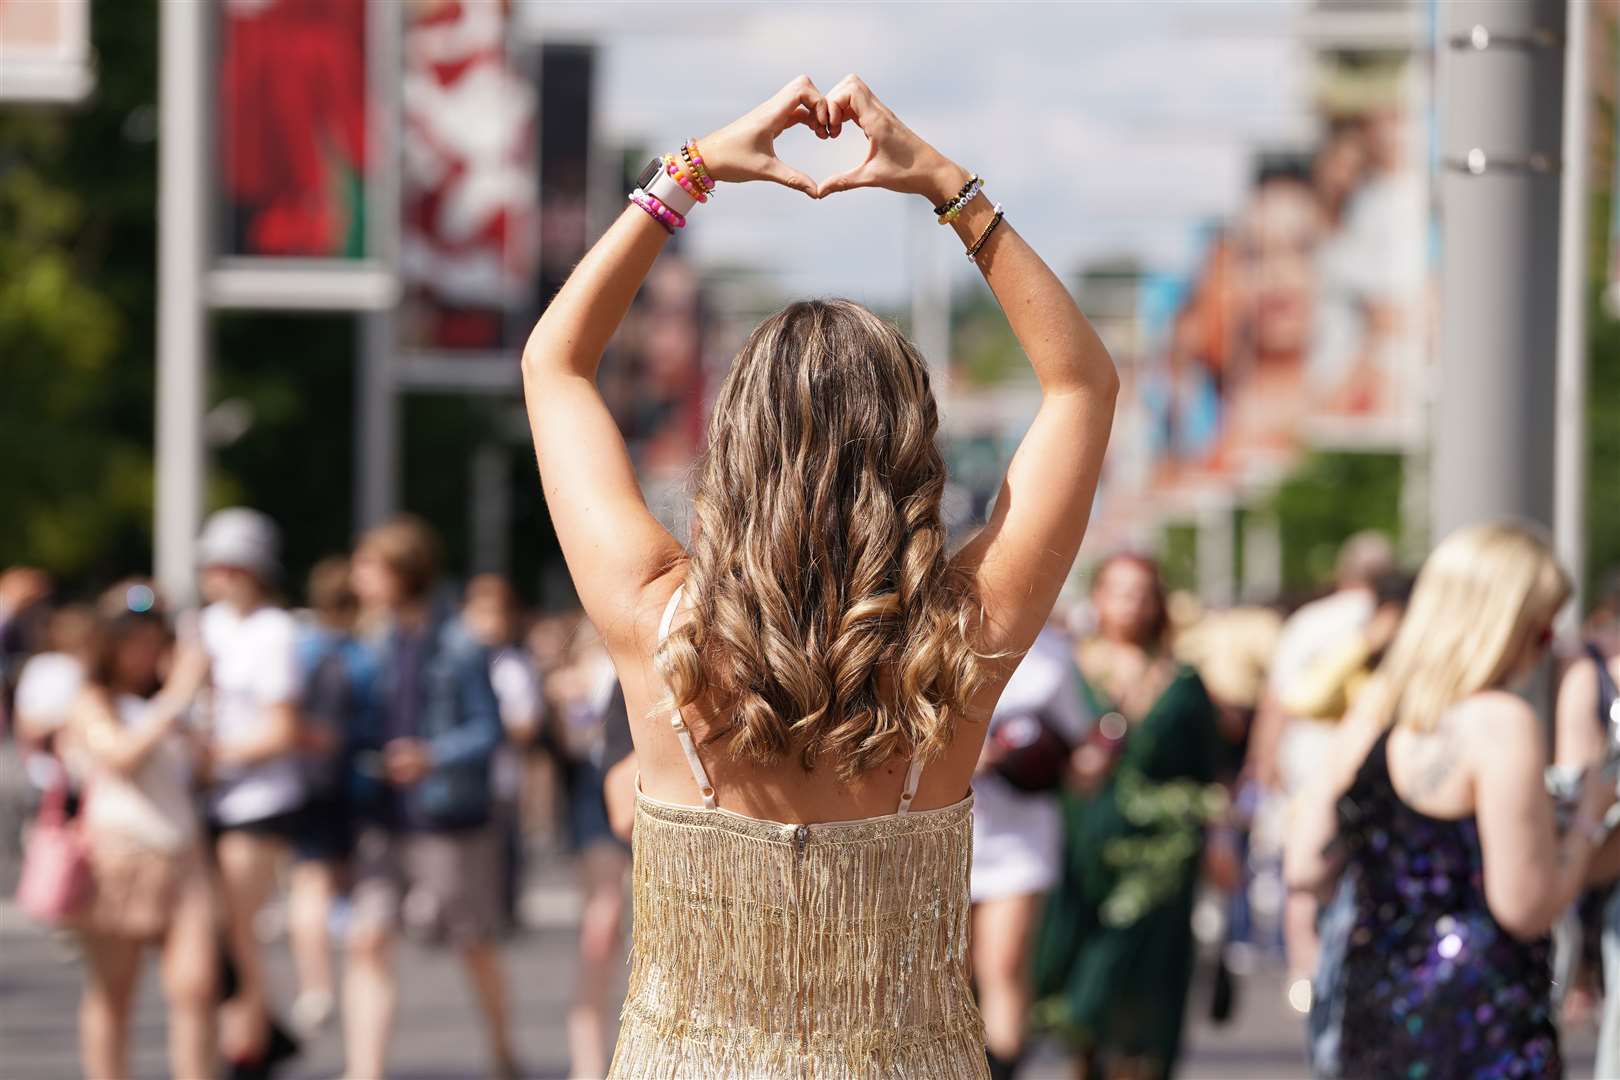 A Taylor Swift fan poses for a photo outside Wembley Stadium in London (Lucy North/PA)